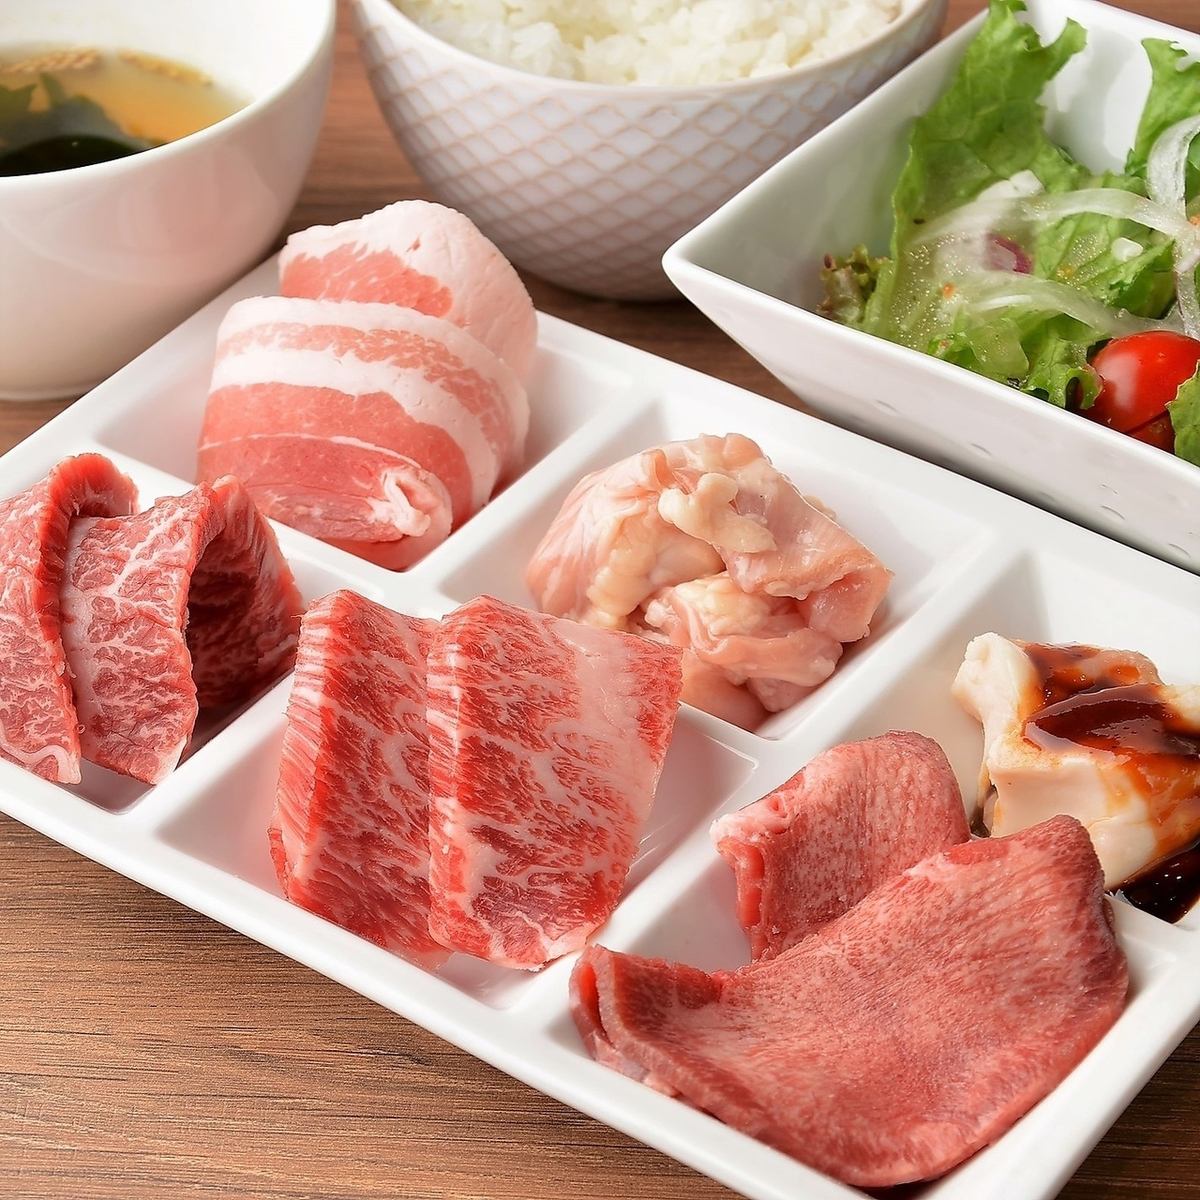 Lunch courses featuring thick-sliced tongue and wagyu beef are very popular!